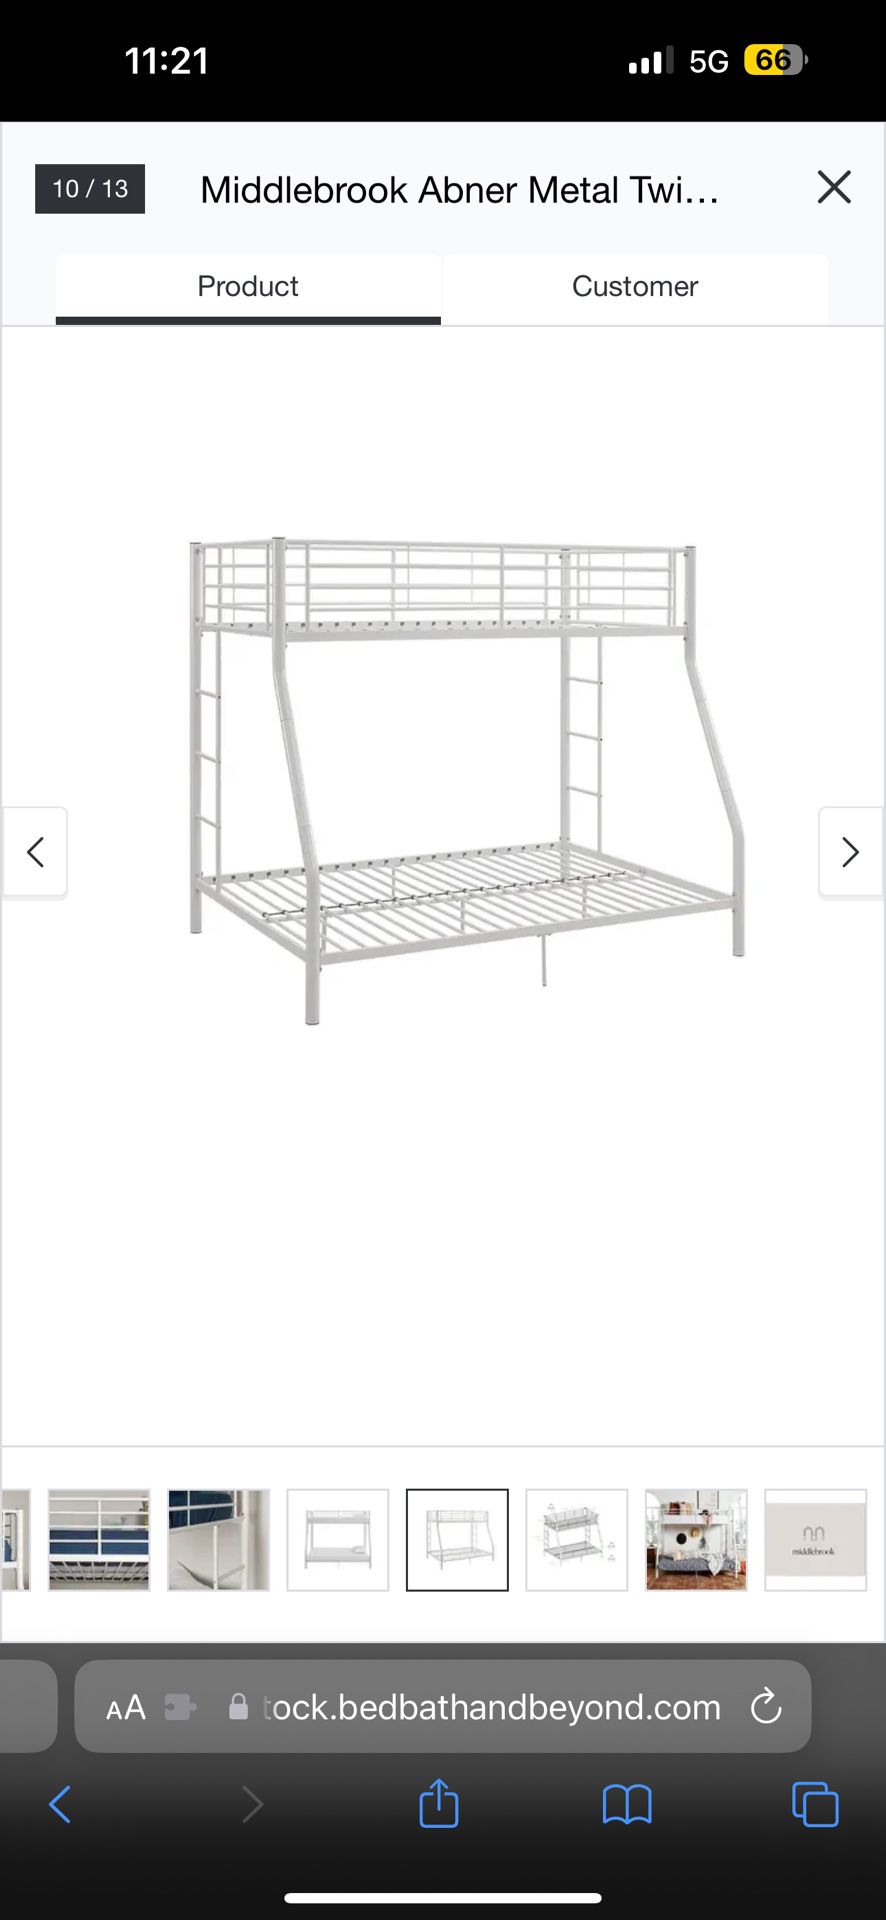 White Metal Twin Over Full Bunk Bed 